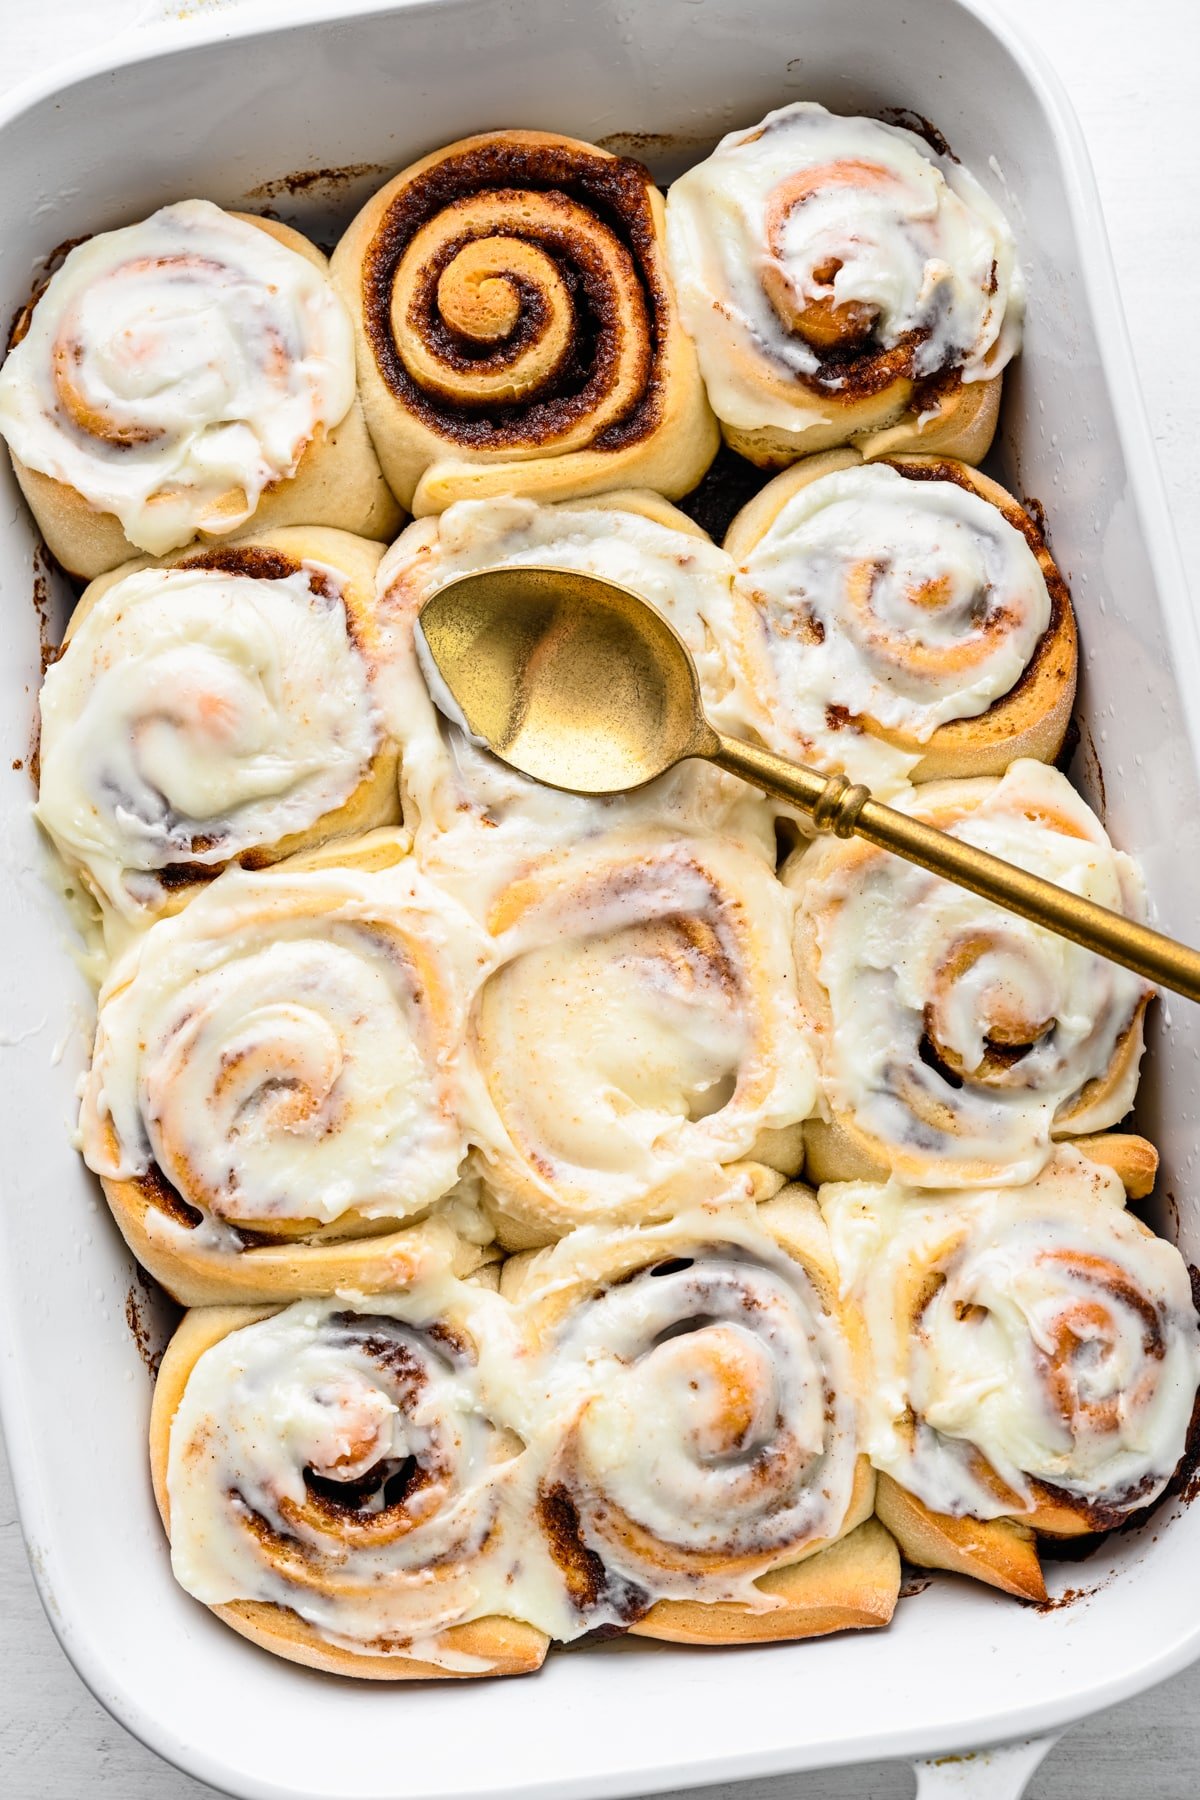 A pan of frosted cinnamon rolls with one cinnamon roll unfrosted.